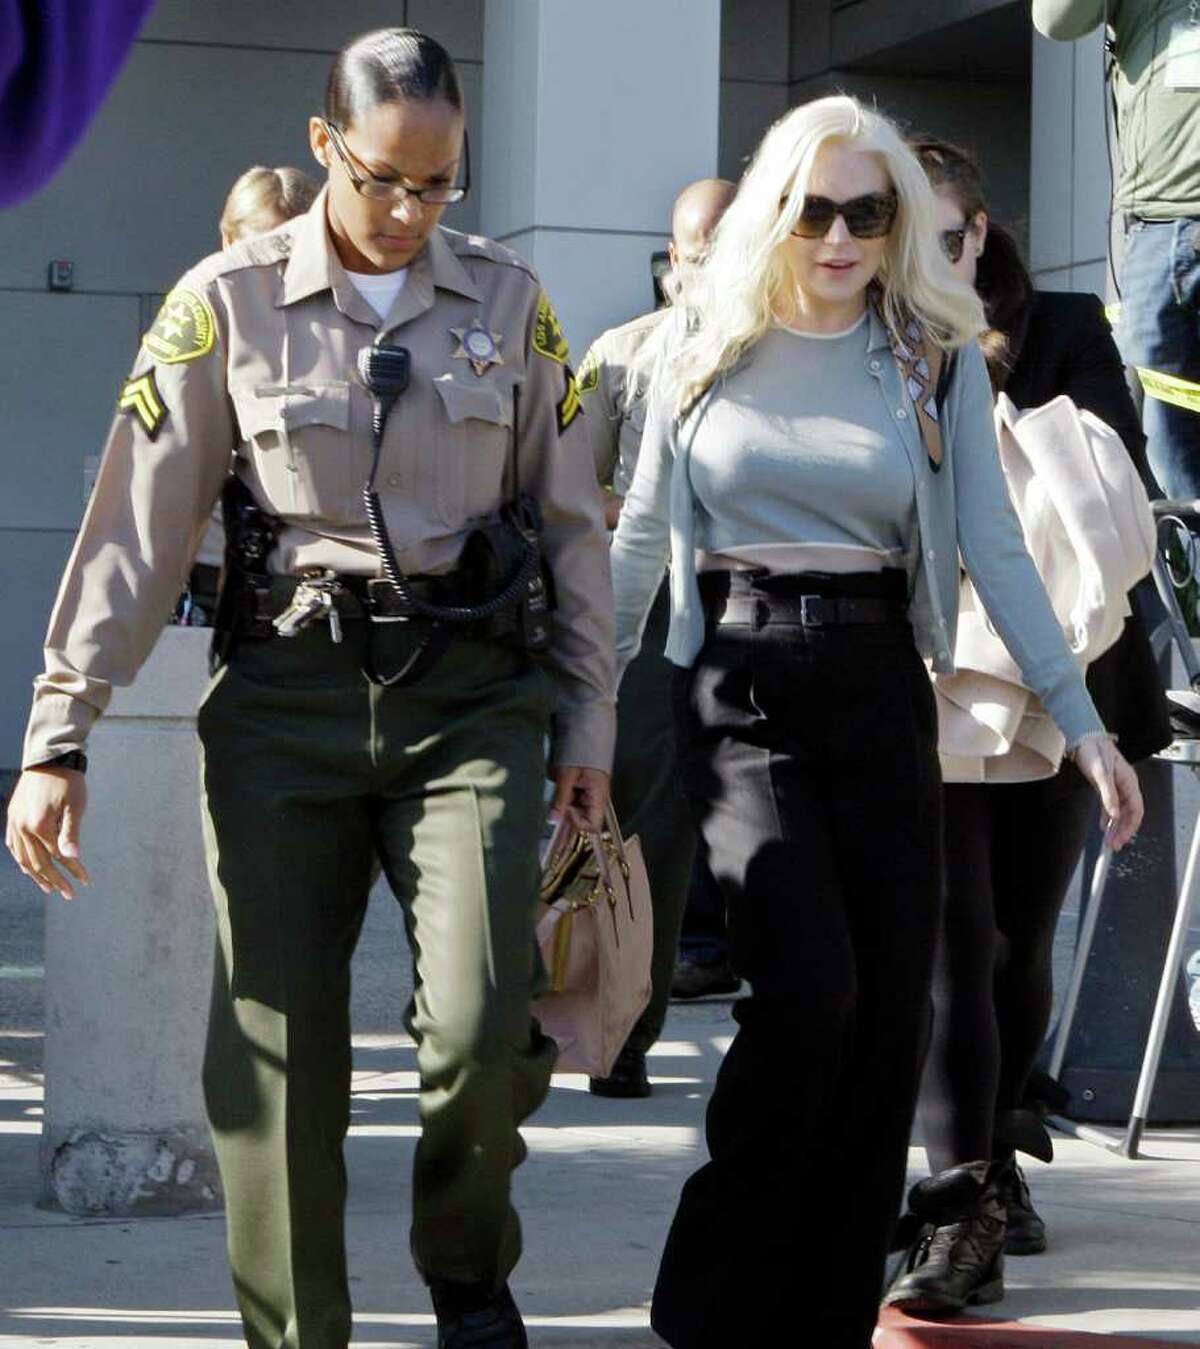 Lindsay Lohan leaves Los Angeles Superior Court after a probation progress hearing Tuesday, Jan. 17, 2012. Superior Court Judge Stephanie Sautner told the actress she is on track to complete strict terms of her probation by the end of March. The 25-year-old is required to do cleanup duty at the morgue and attend therapy sessions. (AP Photo/Reed Saxon)